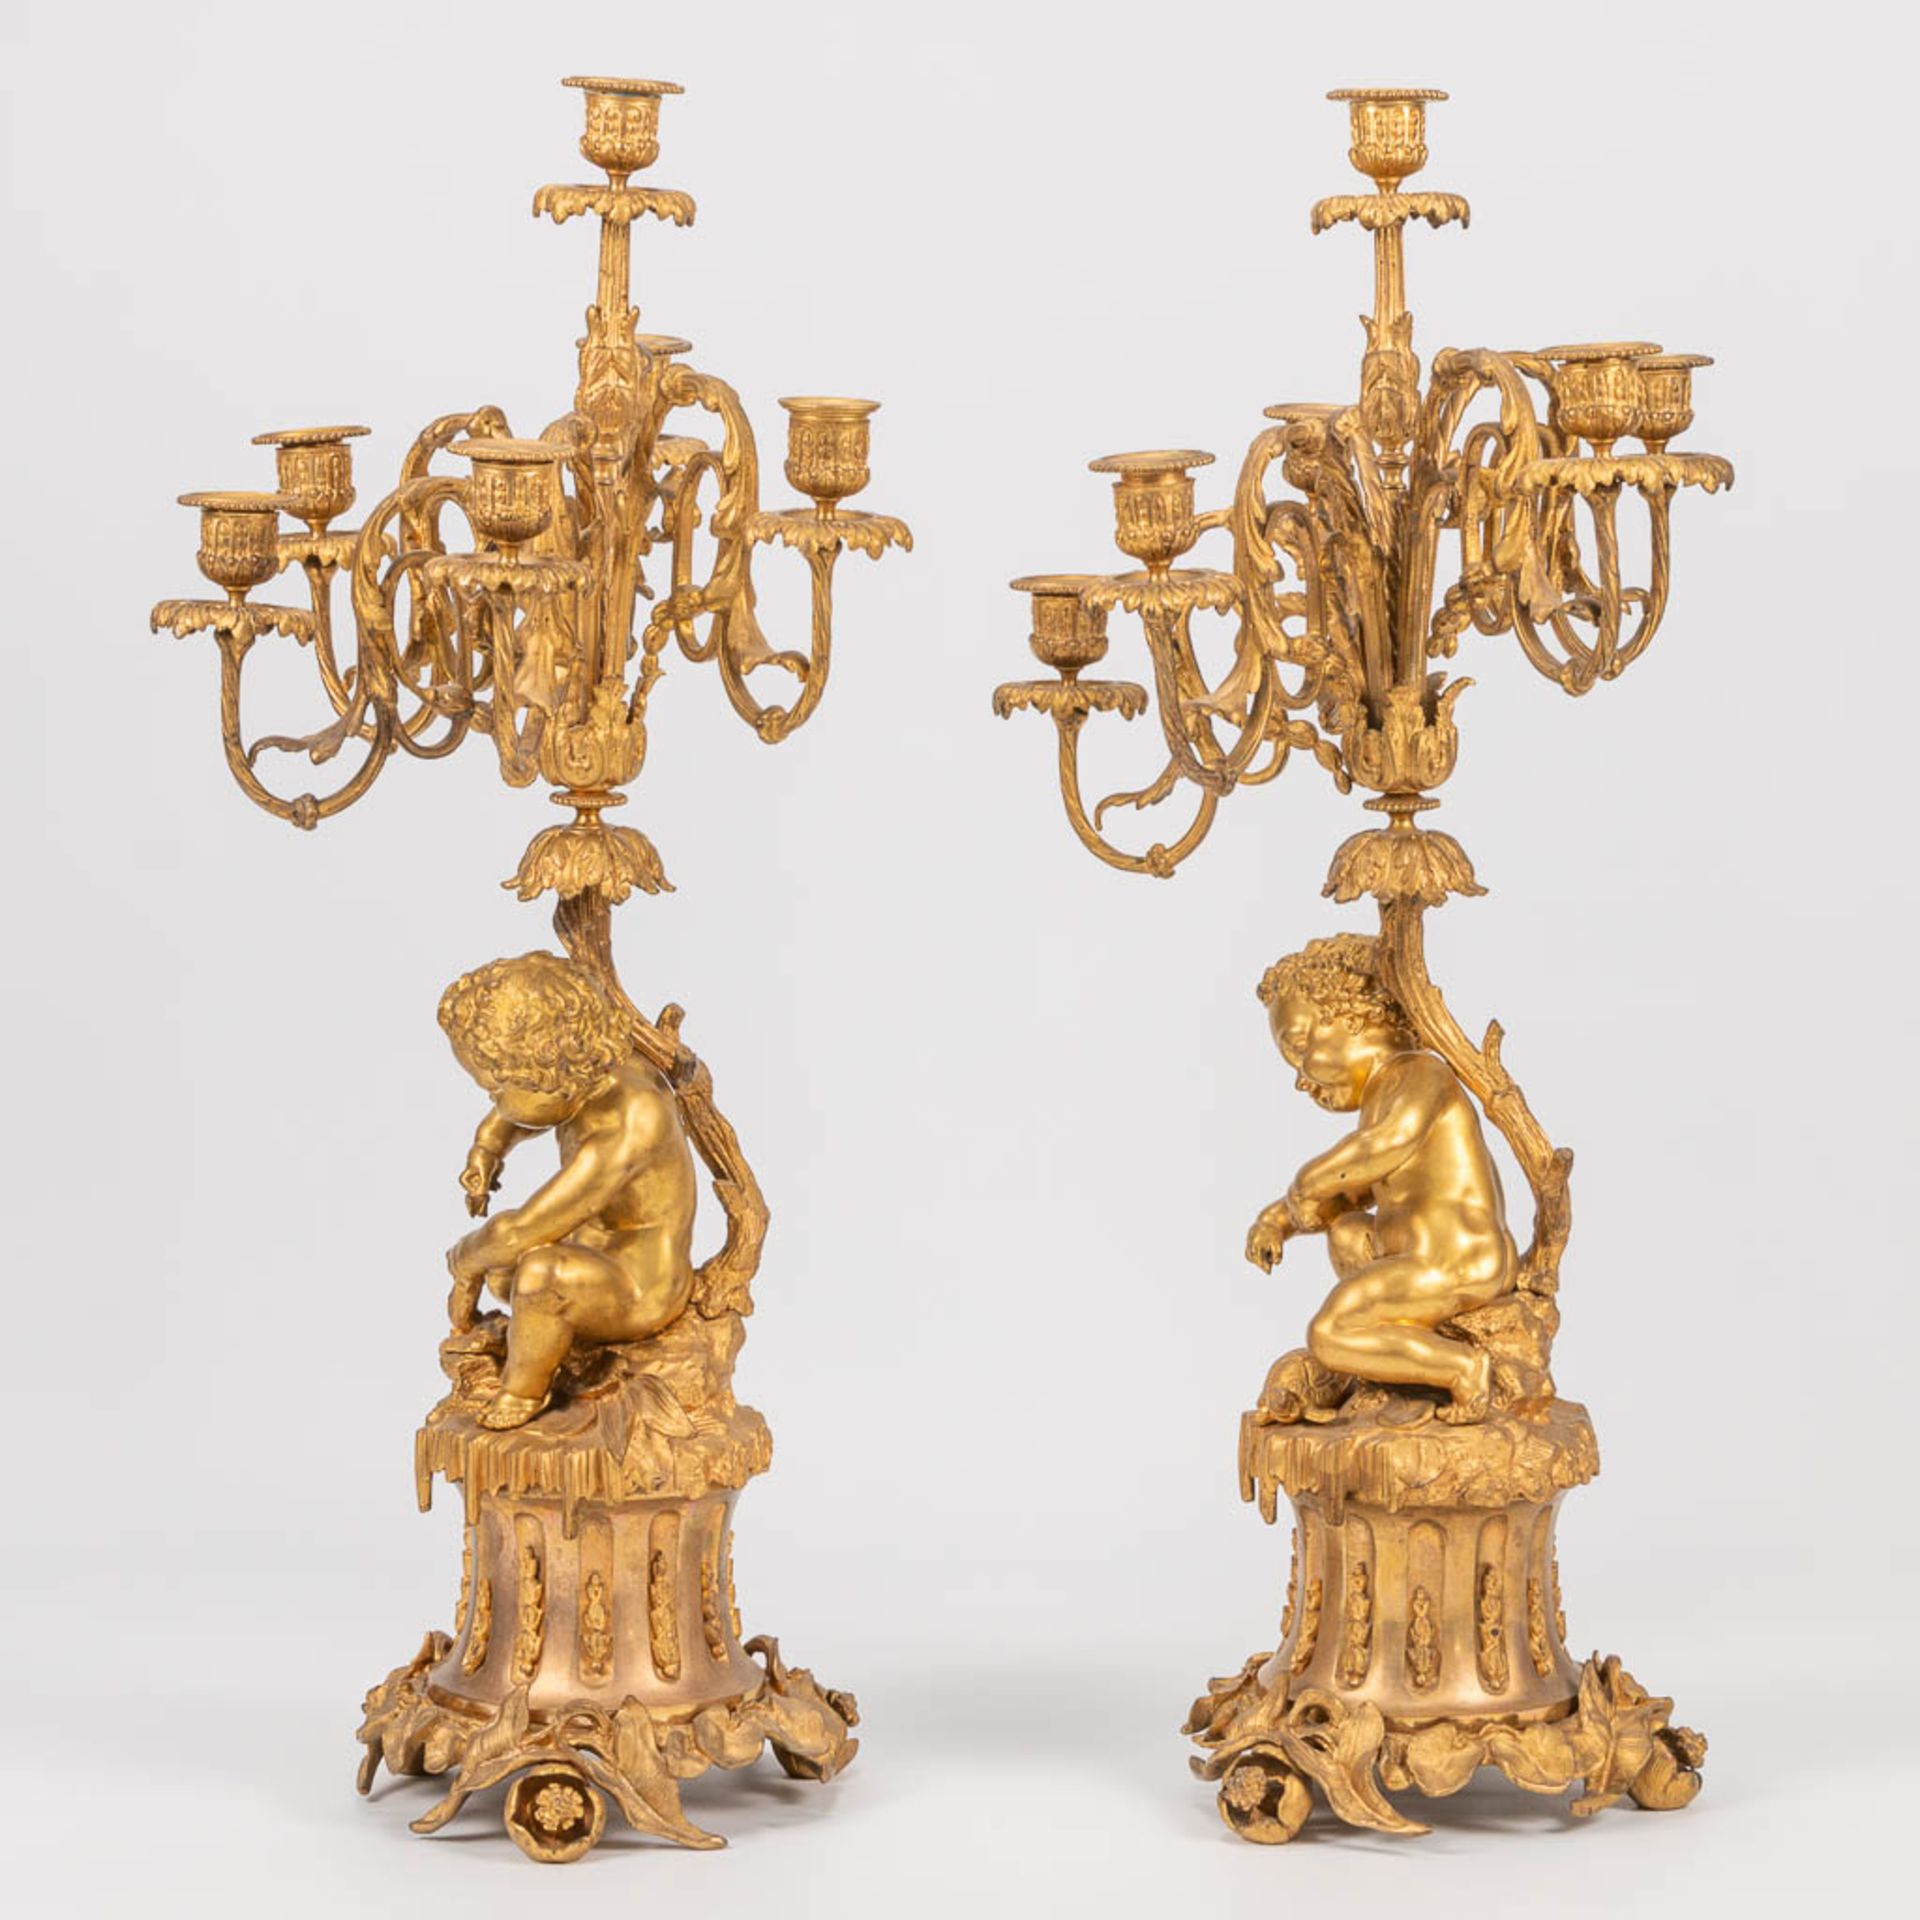 A pair of neoclassical candelabra decorated with putti, playing with pets. 19th century. (30 x 33 x  - Bild 5 aus 17